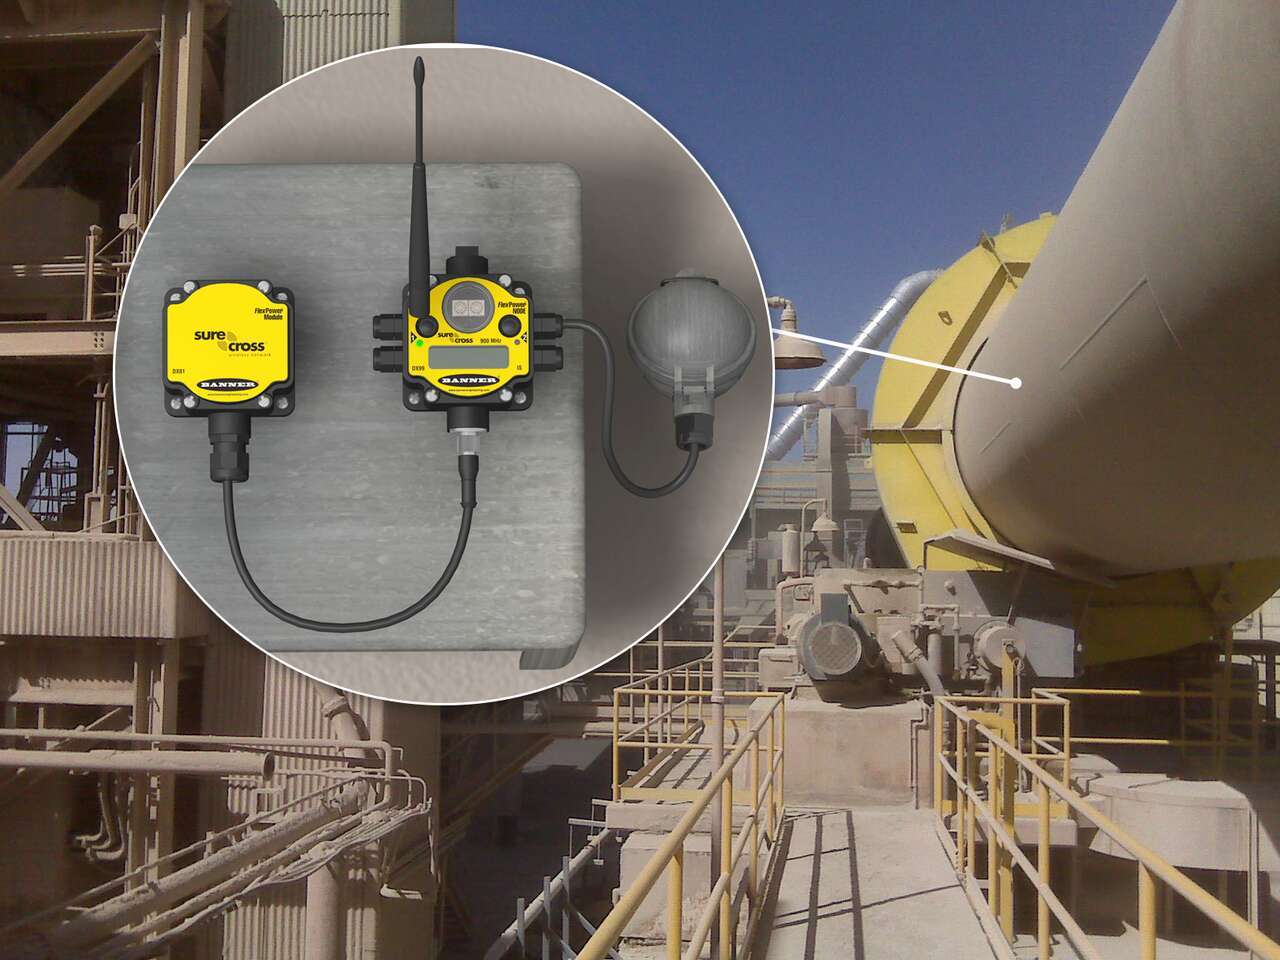 Monitoring Rotating Equipment in Unsafe or Harsh Conditions